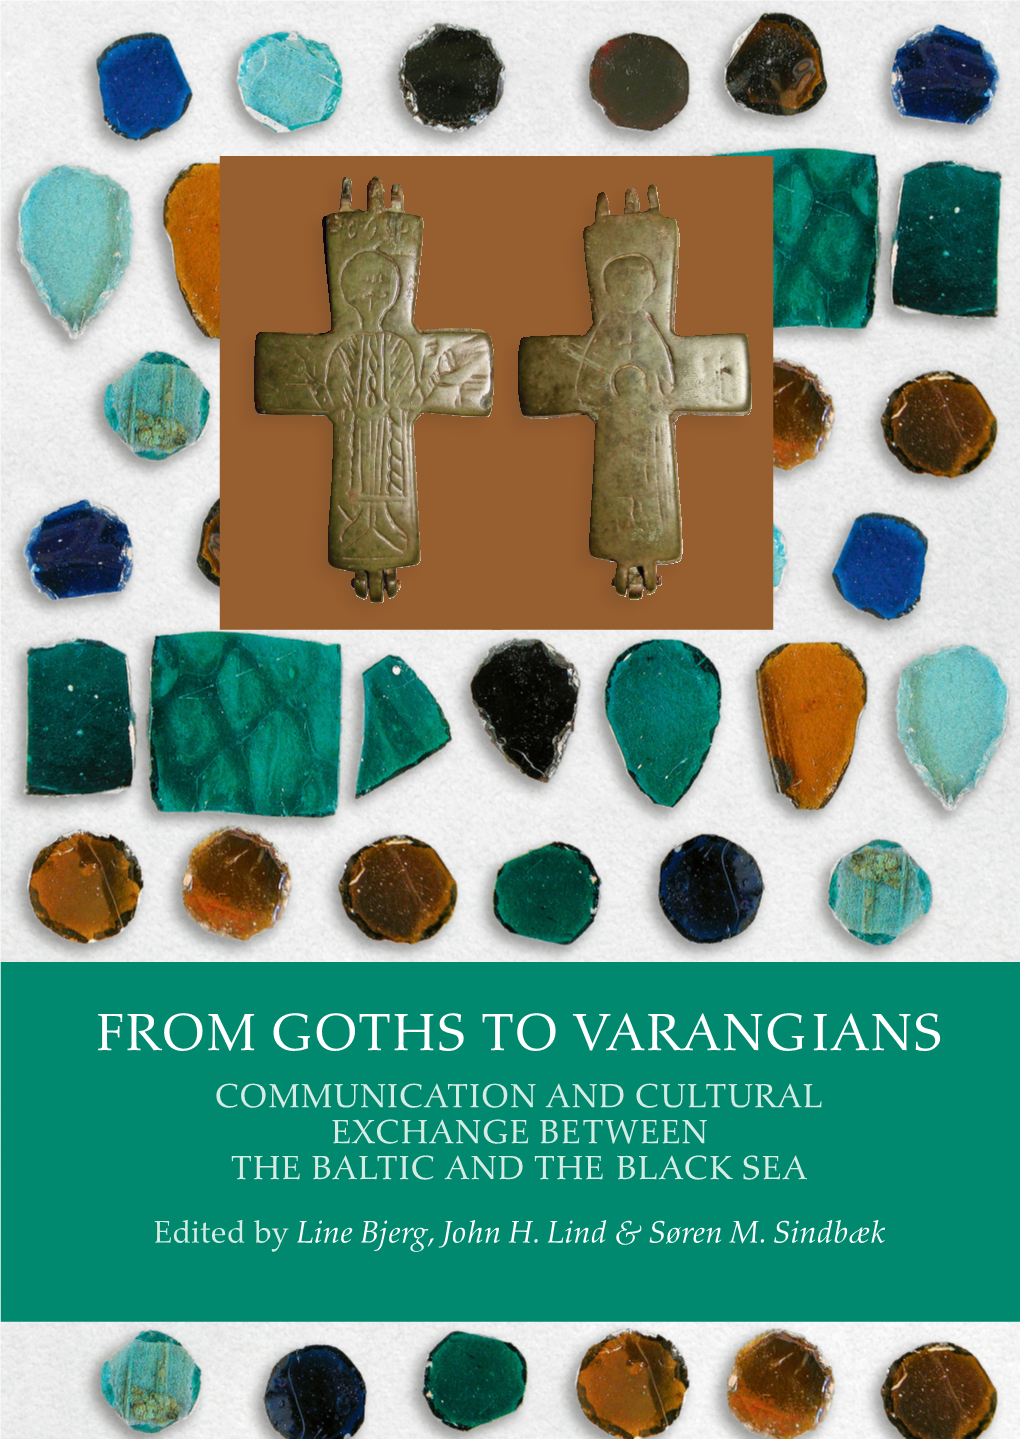 From Goths to Varangians 15